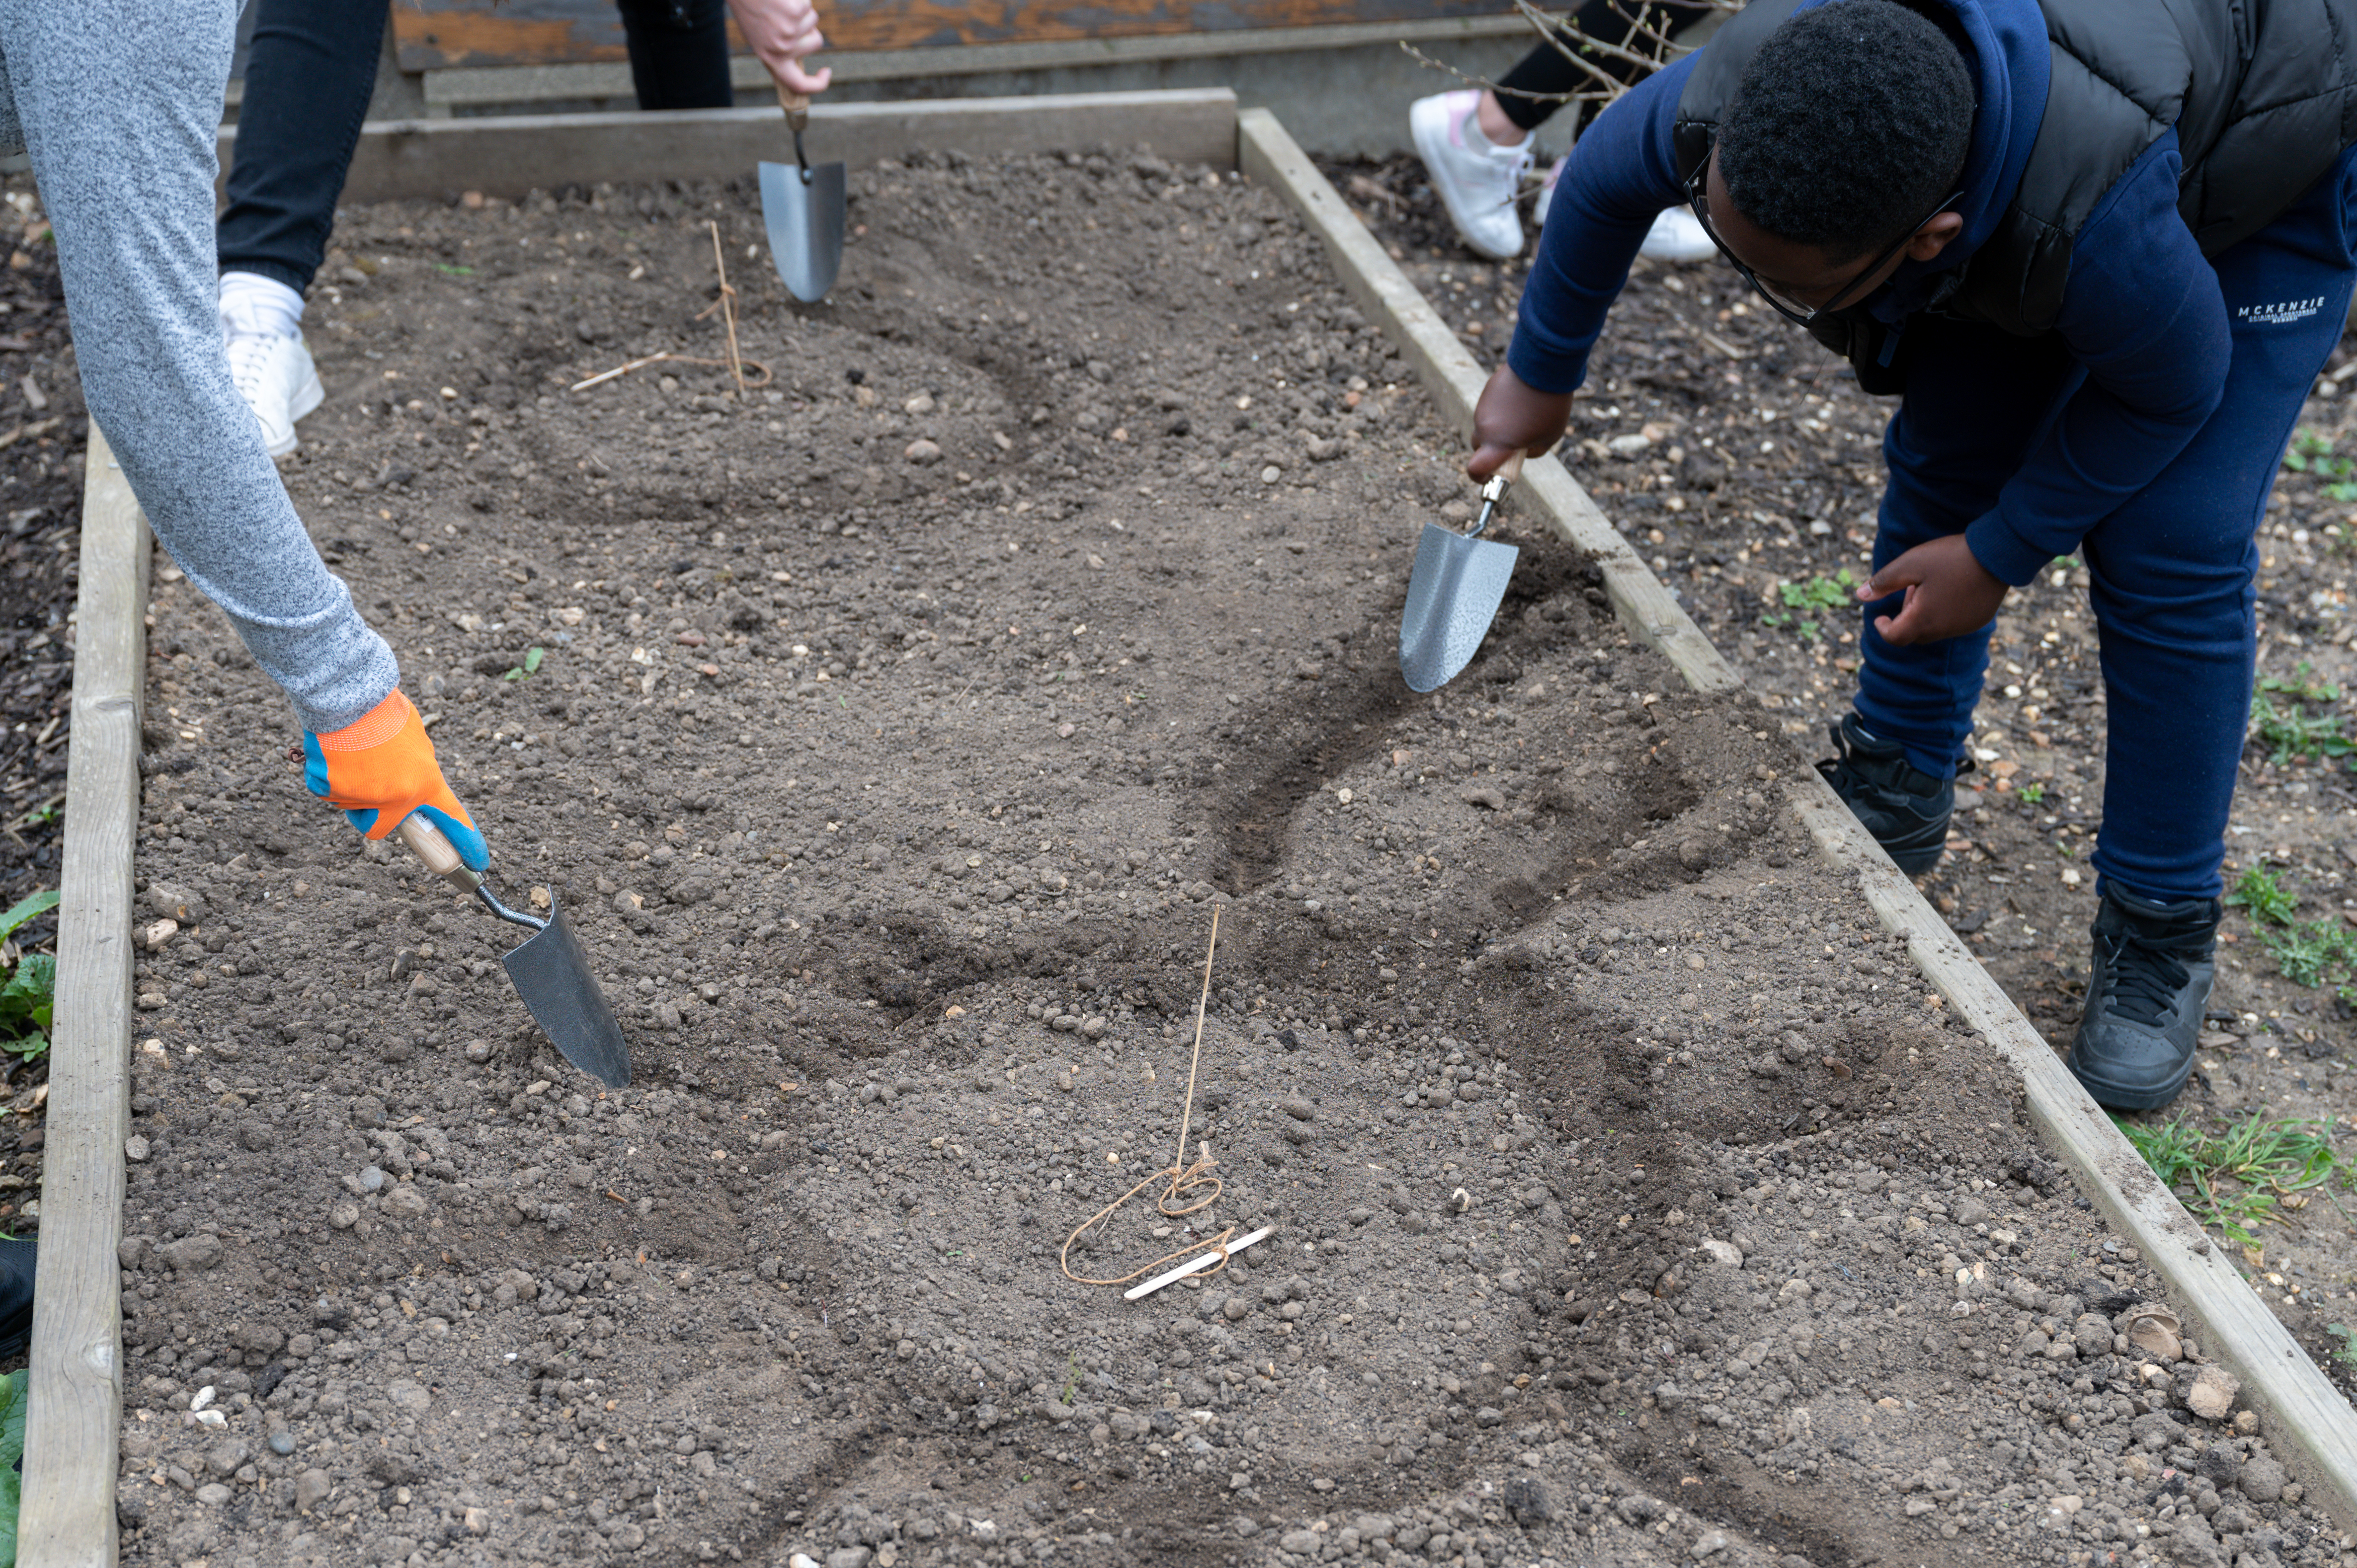 children and adults dig a pattern in soil using trowels